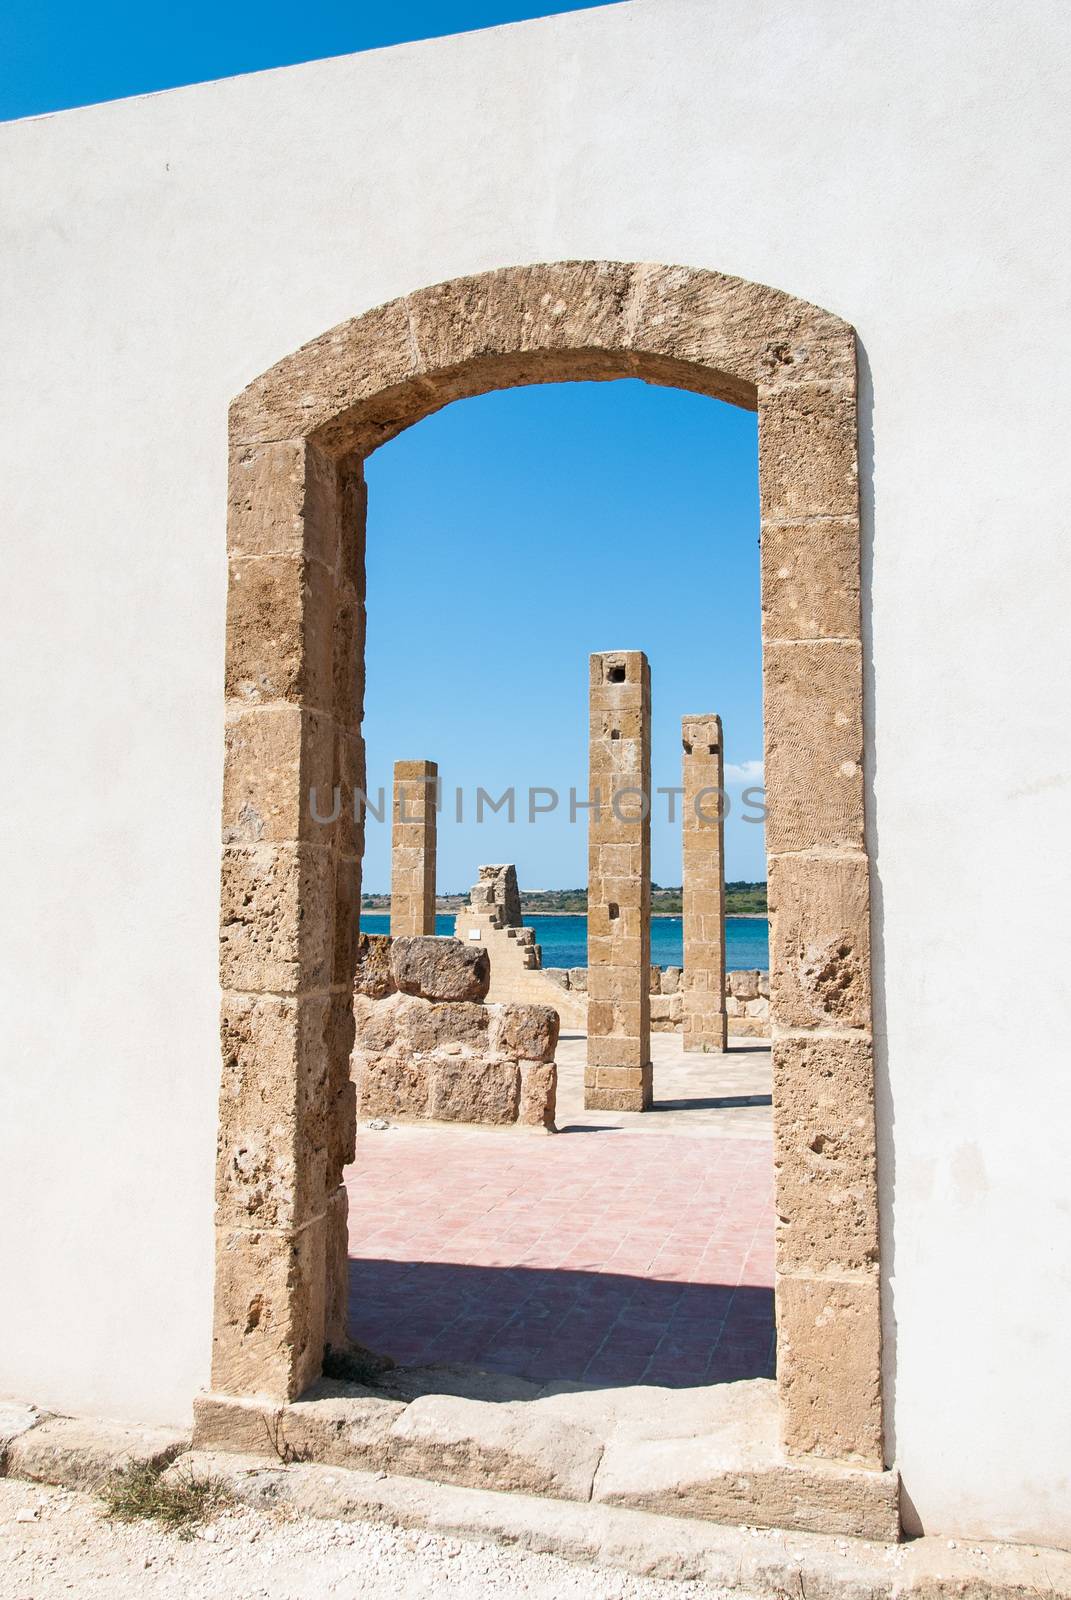 Through a door of an old tuna-fishery building in Vendicari nature reserve, Sicily, Italy